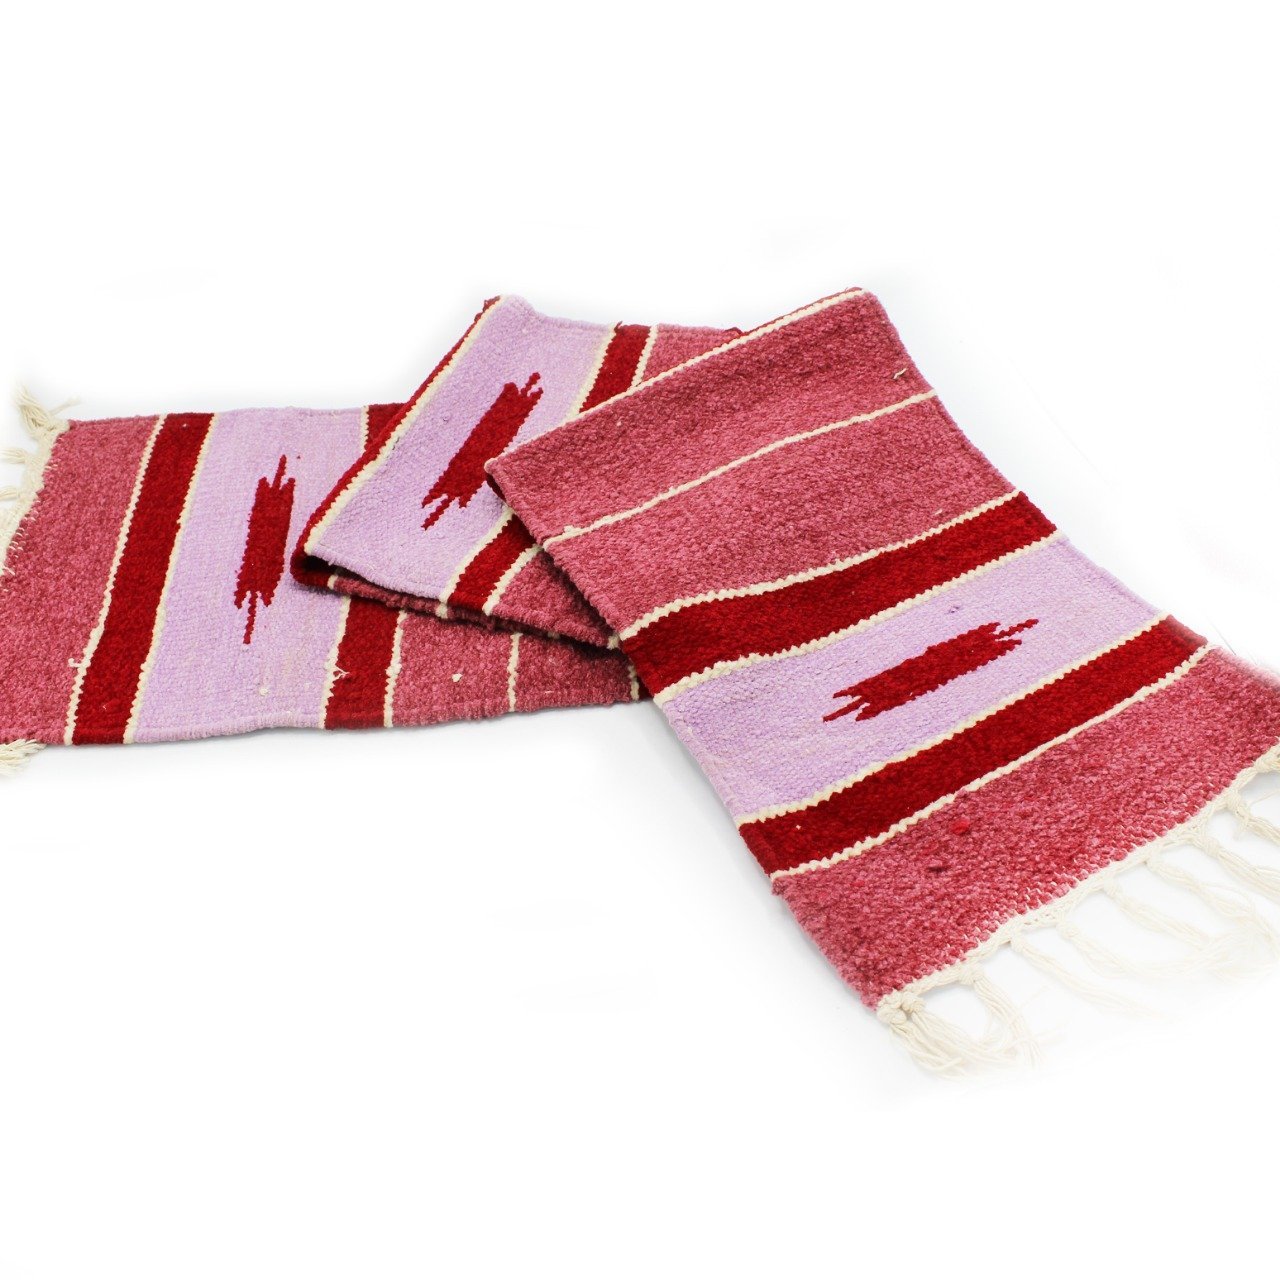 TABLE RUNNER 1 PC SET - Woolen Patterned - waseeh.com